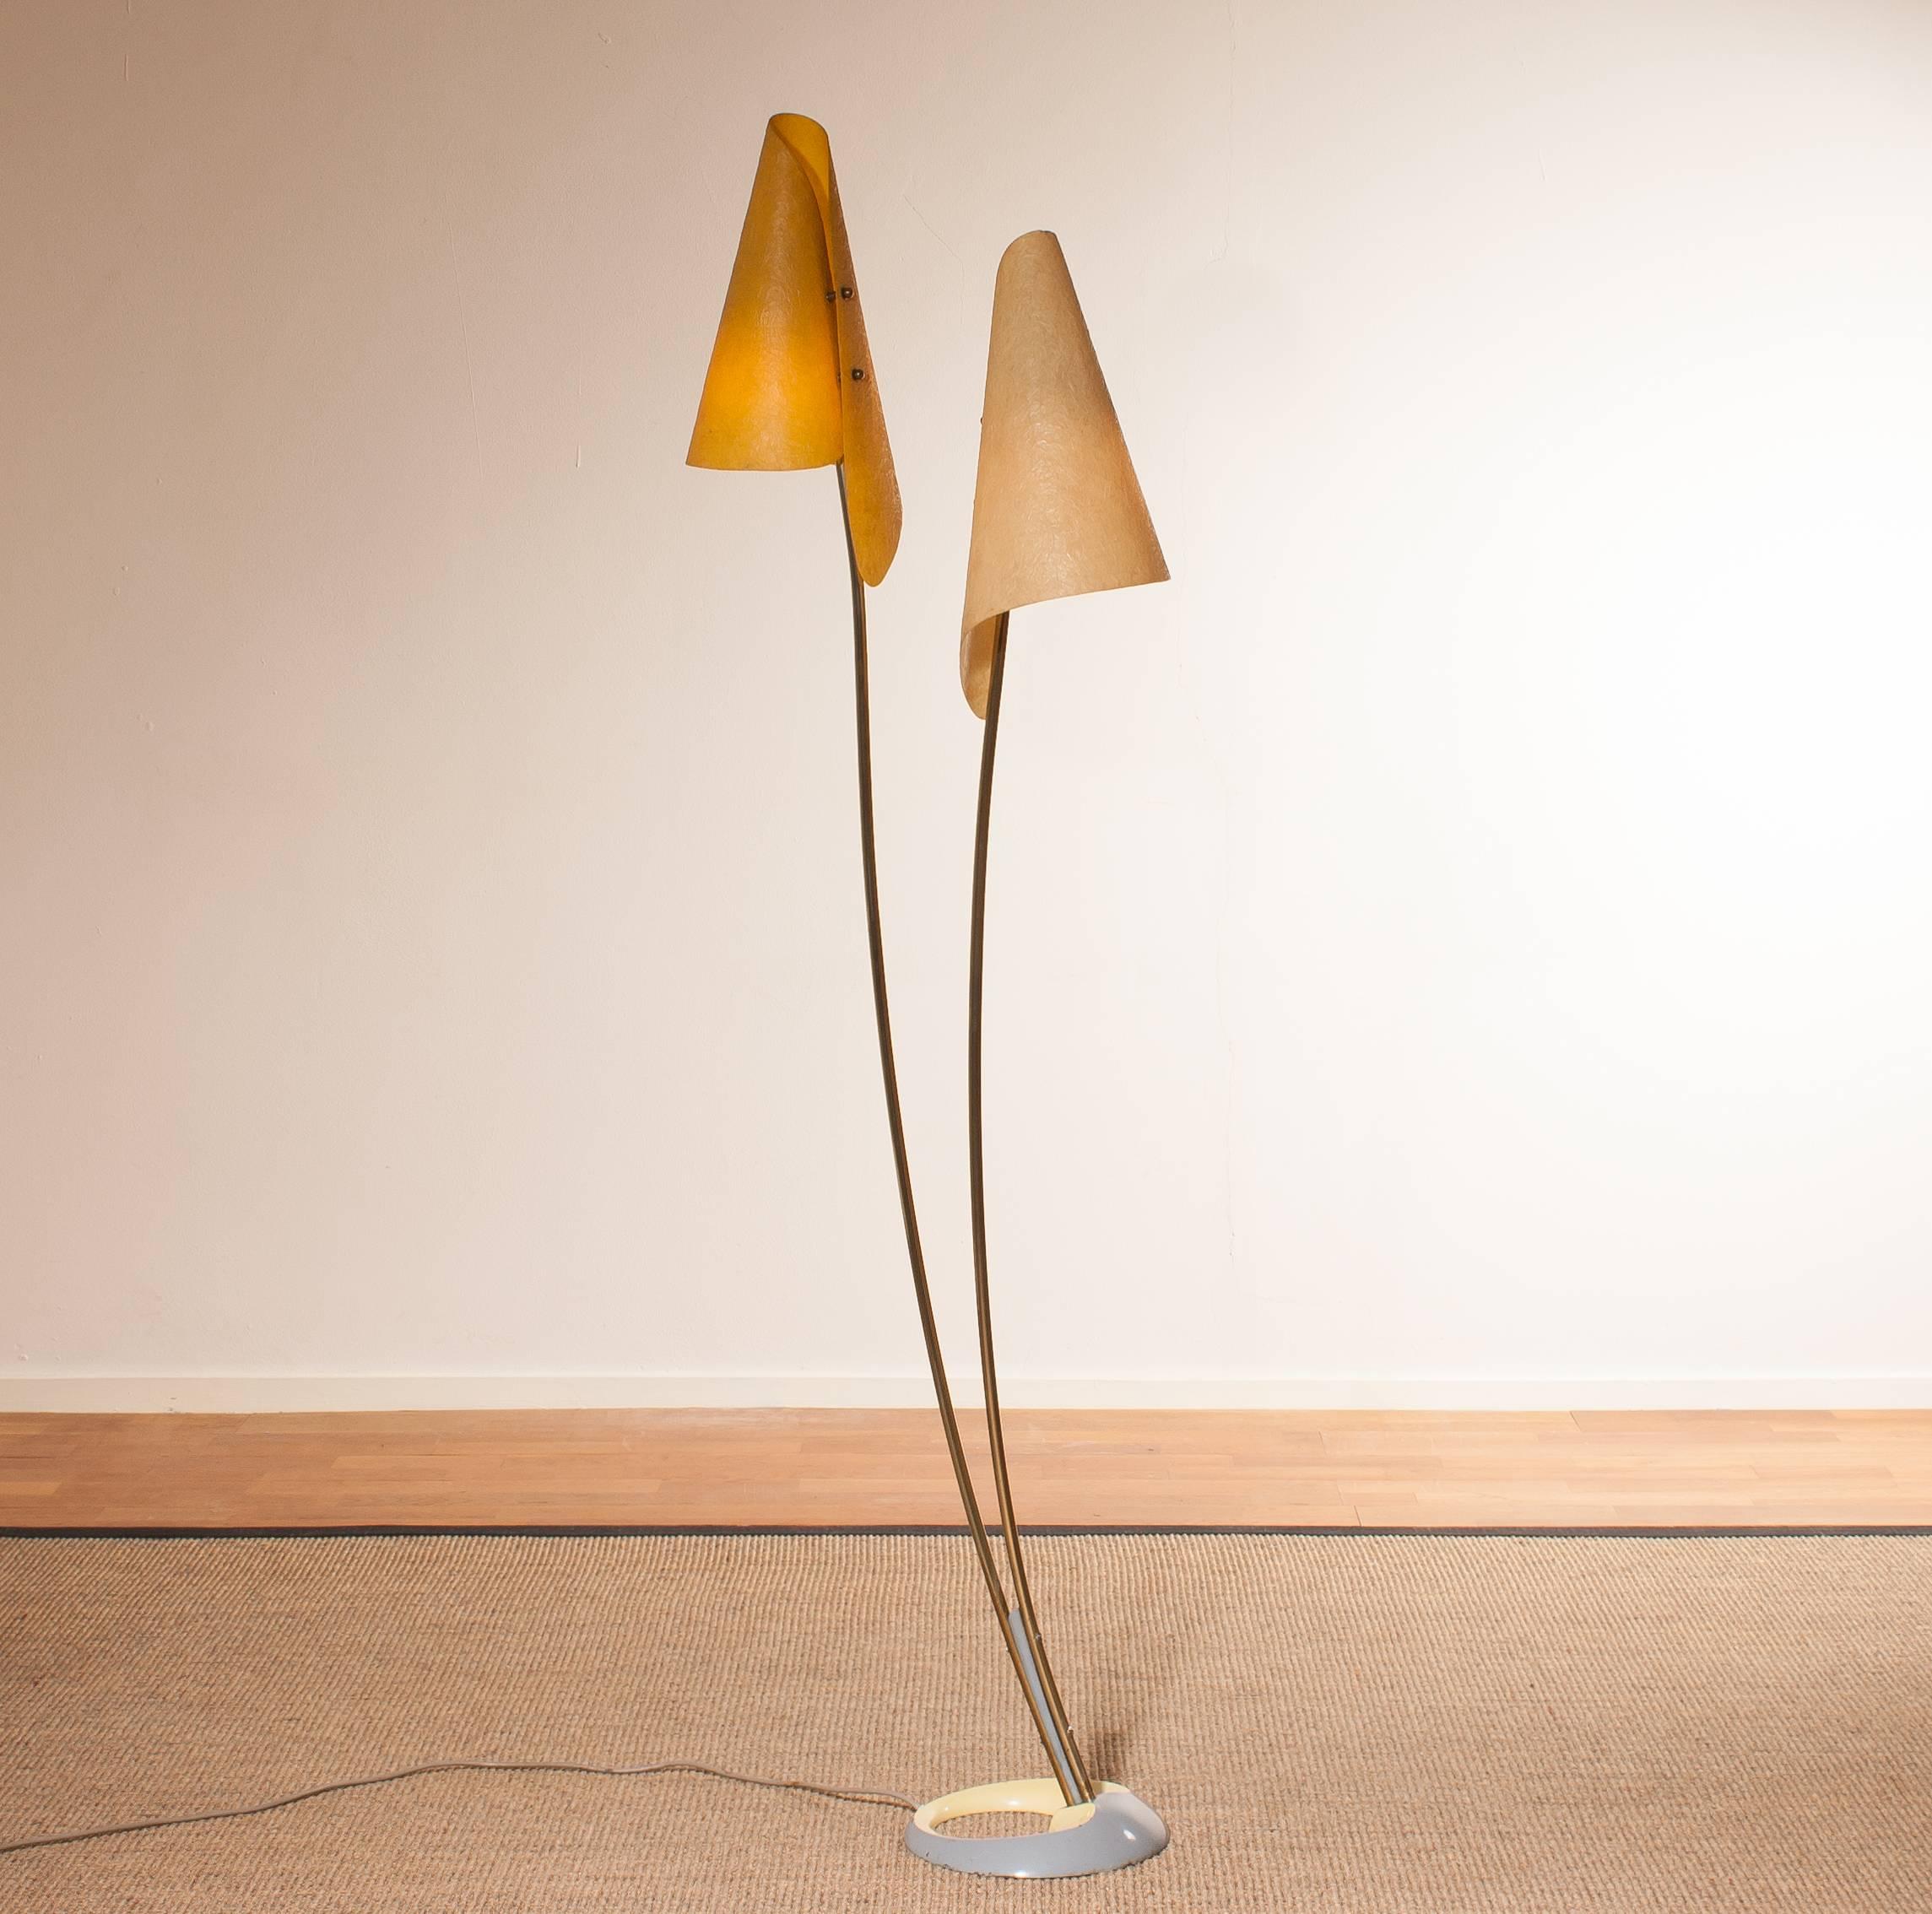 Very rare and beautiful floor lamp with two fibreglass shades and a wonderful design stand.
This very nice design is made in Germany.
It is in a very good and working condition.
Period 1960s.
Dimensions: H 164 cm, W 46 cm, D 25 cm.